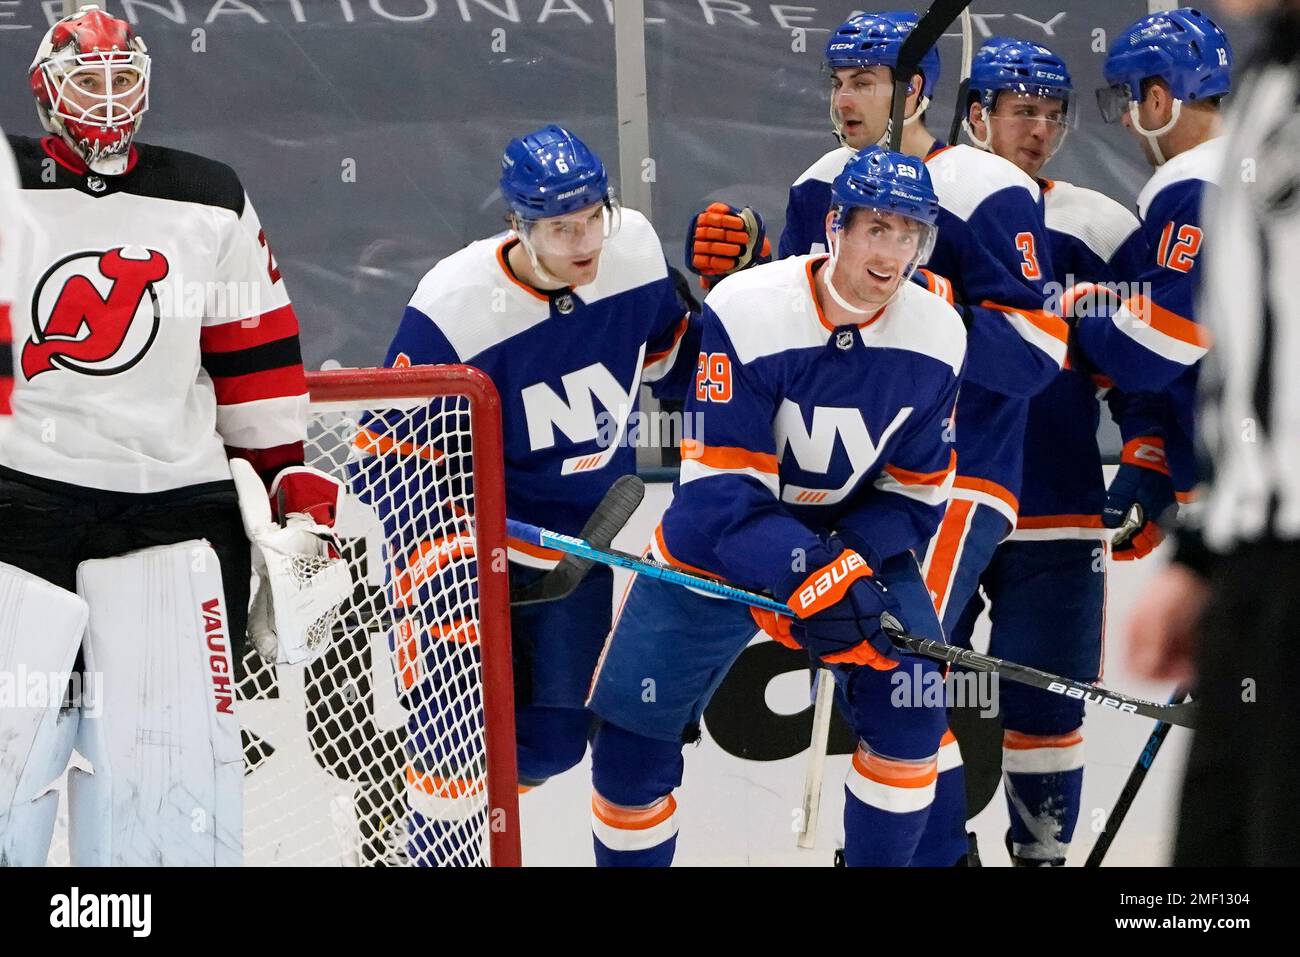 New Jersey Devils goaltender Mackenzie Blackwood, left, looks at a video replay above the ice as New York Islanders center Brock Nelson (29) and defenseman Ryan Pulock (6) skate toward the bench